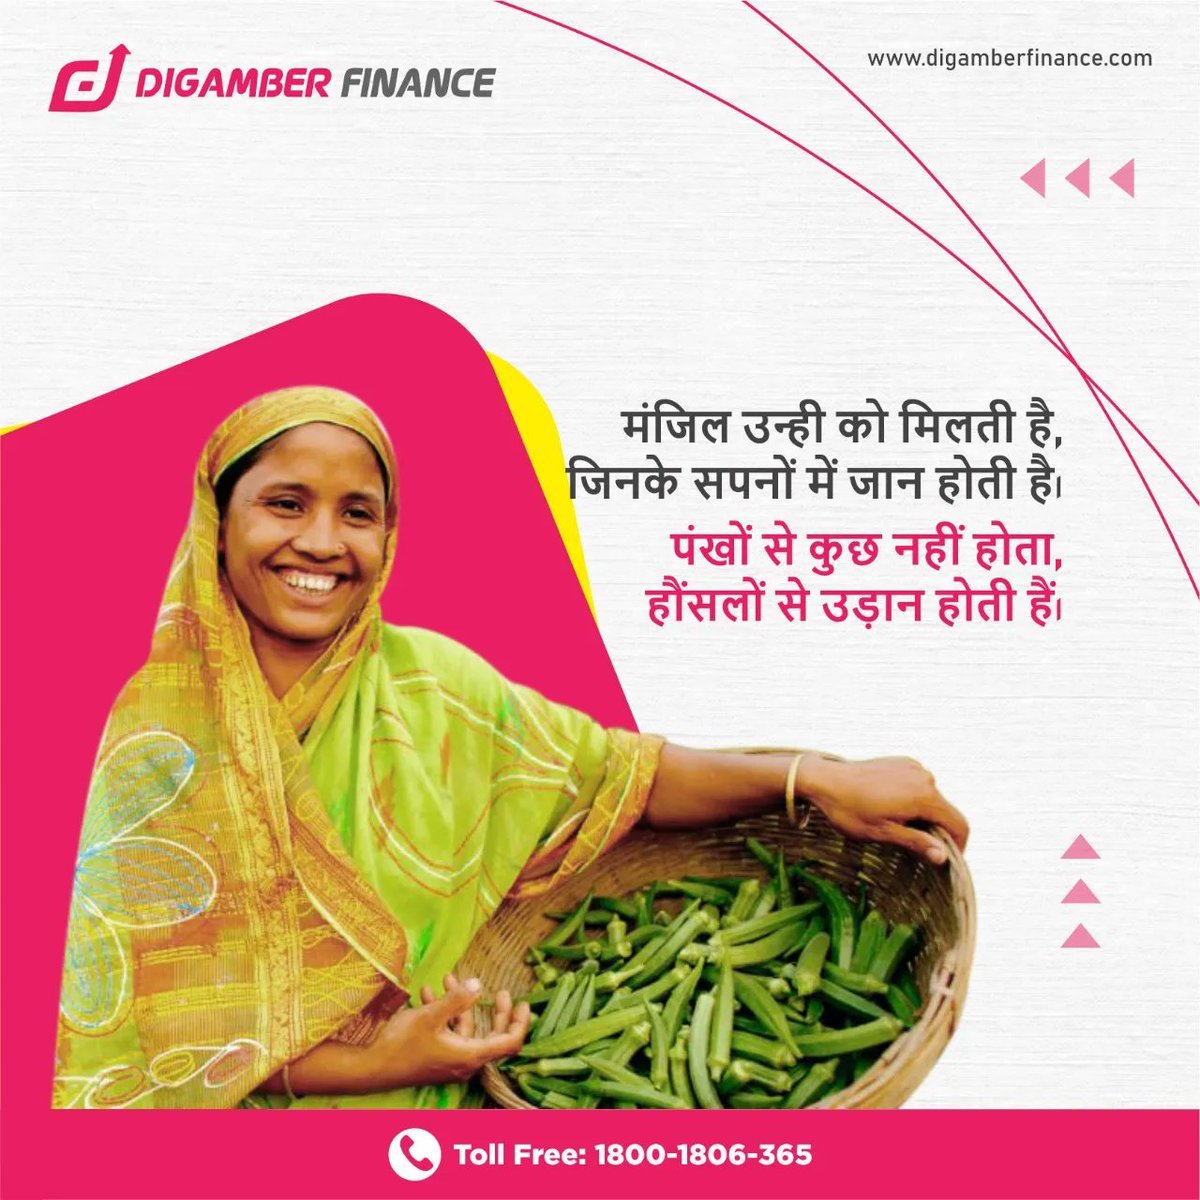 Stay Motivated. Stay Focused
#staymotivated #KeepInspired #motivateothers #financialgrowth #smallloan #financialfreedom #msmeloan #atmanirbharbharat #womenempowerment #loanforbusiness #quickloan